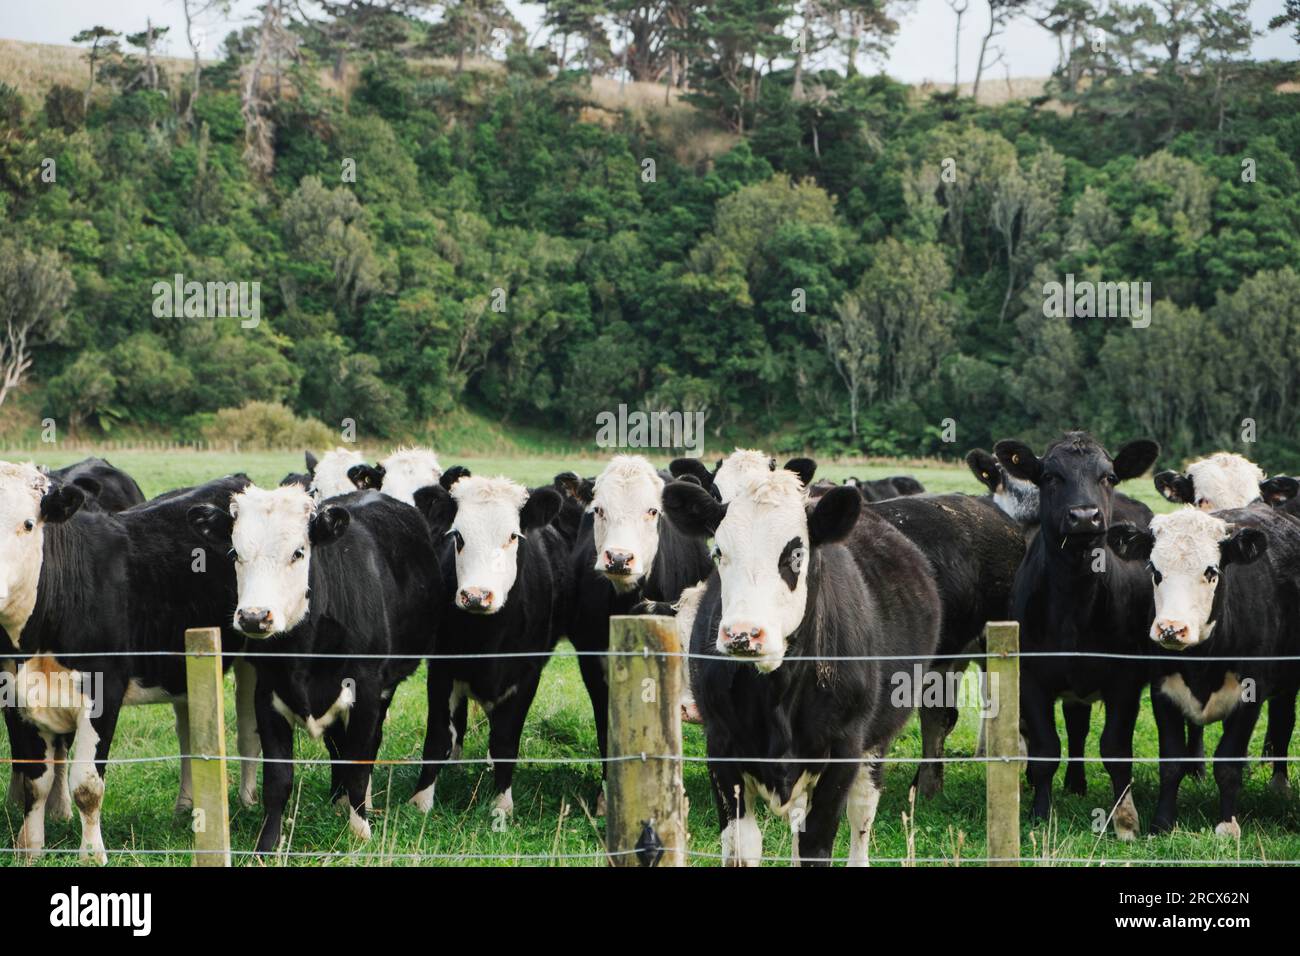 Cattle in a paddock behind a fence Stock Photo